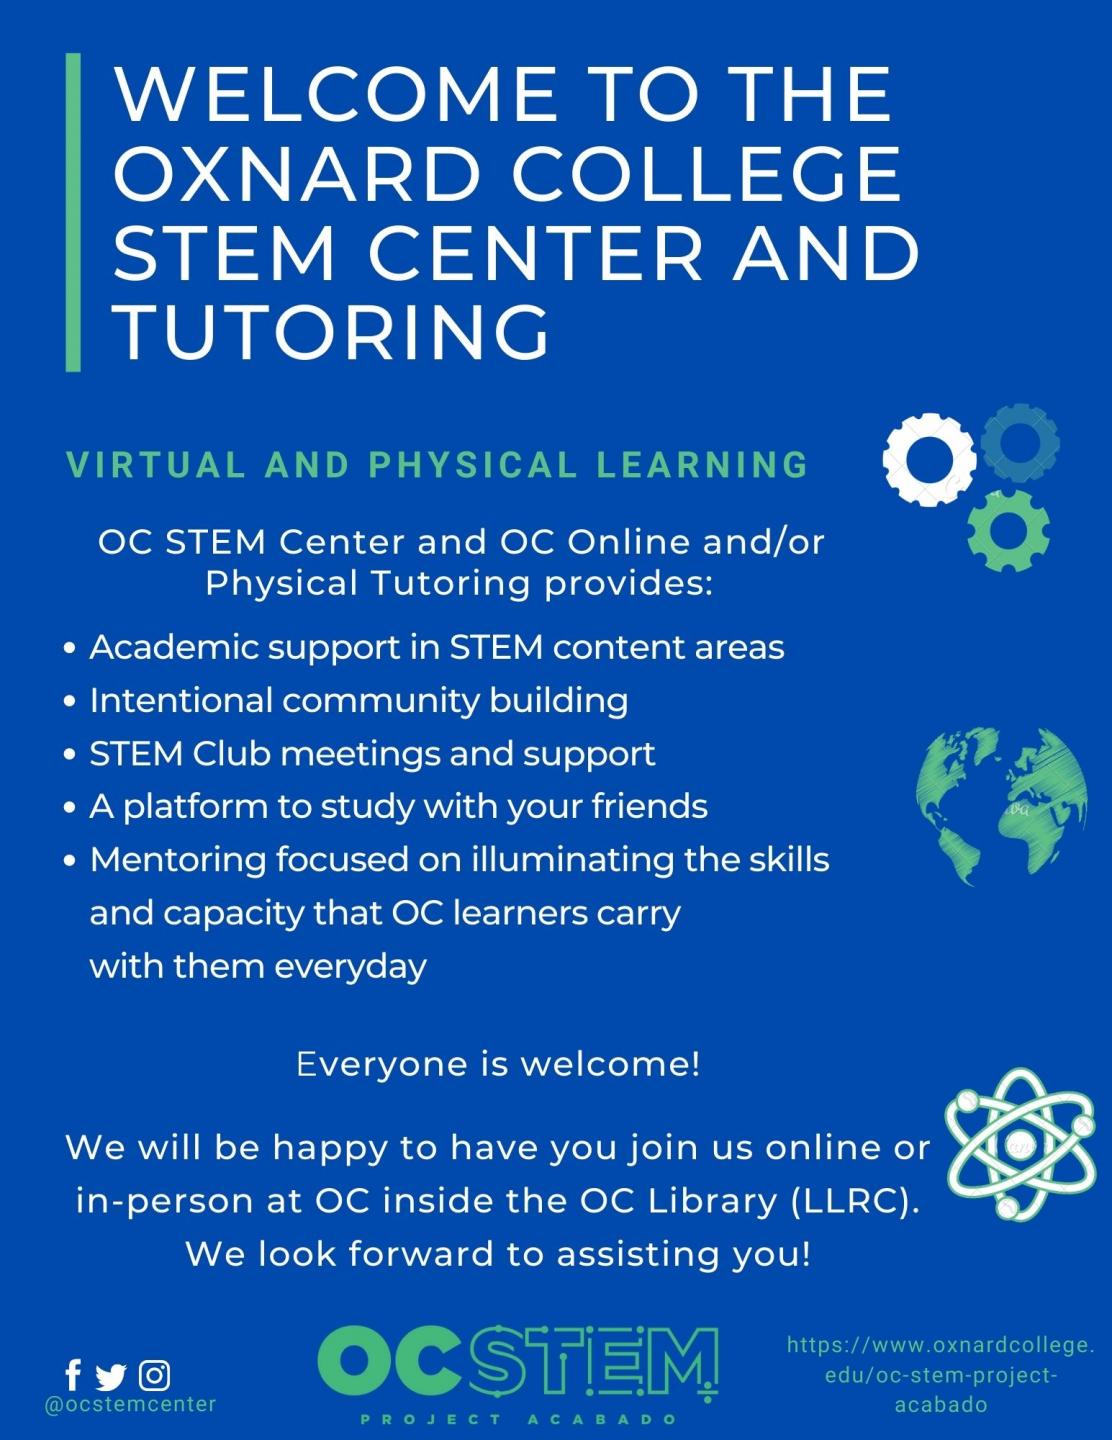 Fall 21 Welcome to OC STEM and Tutoring